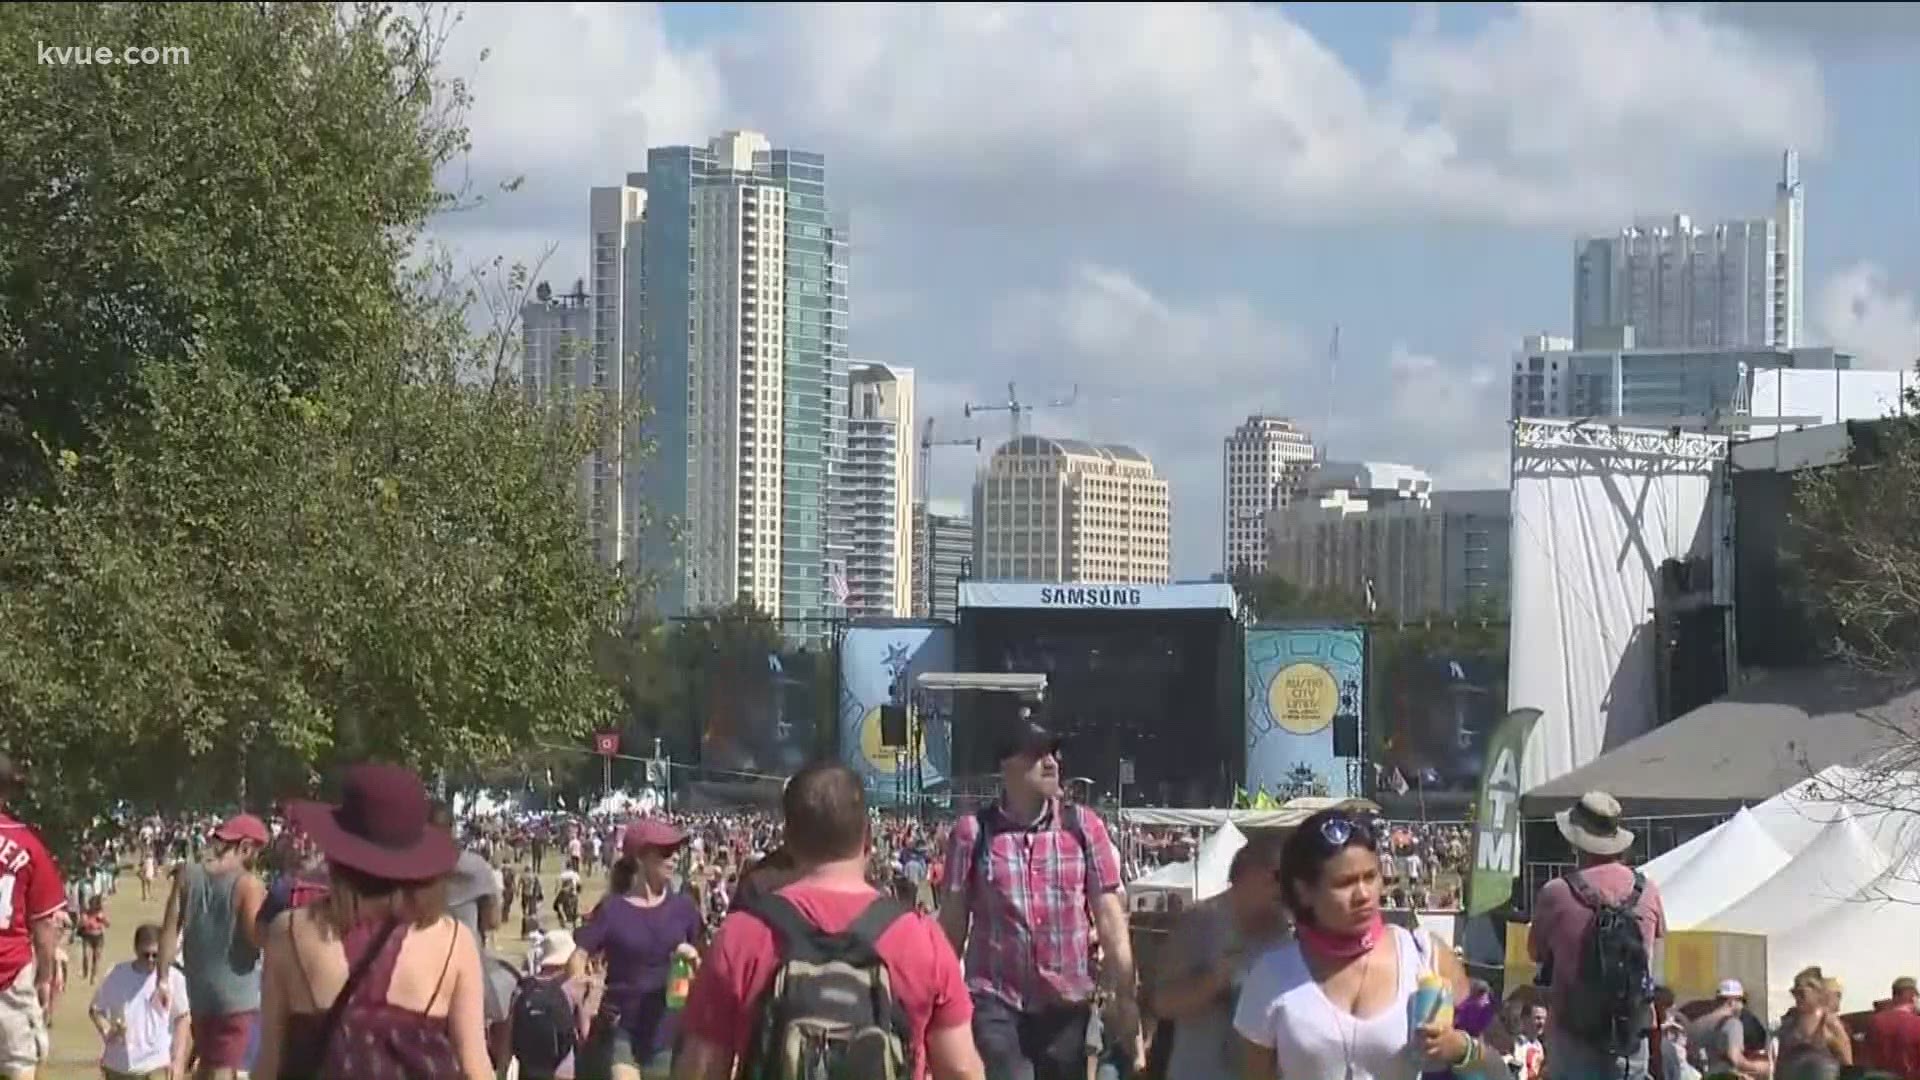 The Austin City Limits Music Festival has been canceled. Brittany Flowers tells us how it isn't just festival-goers who are affected by the decision.